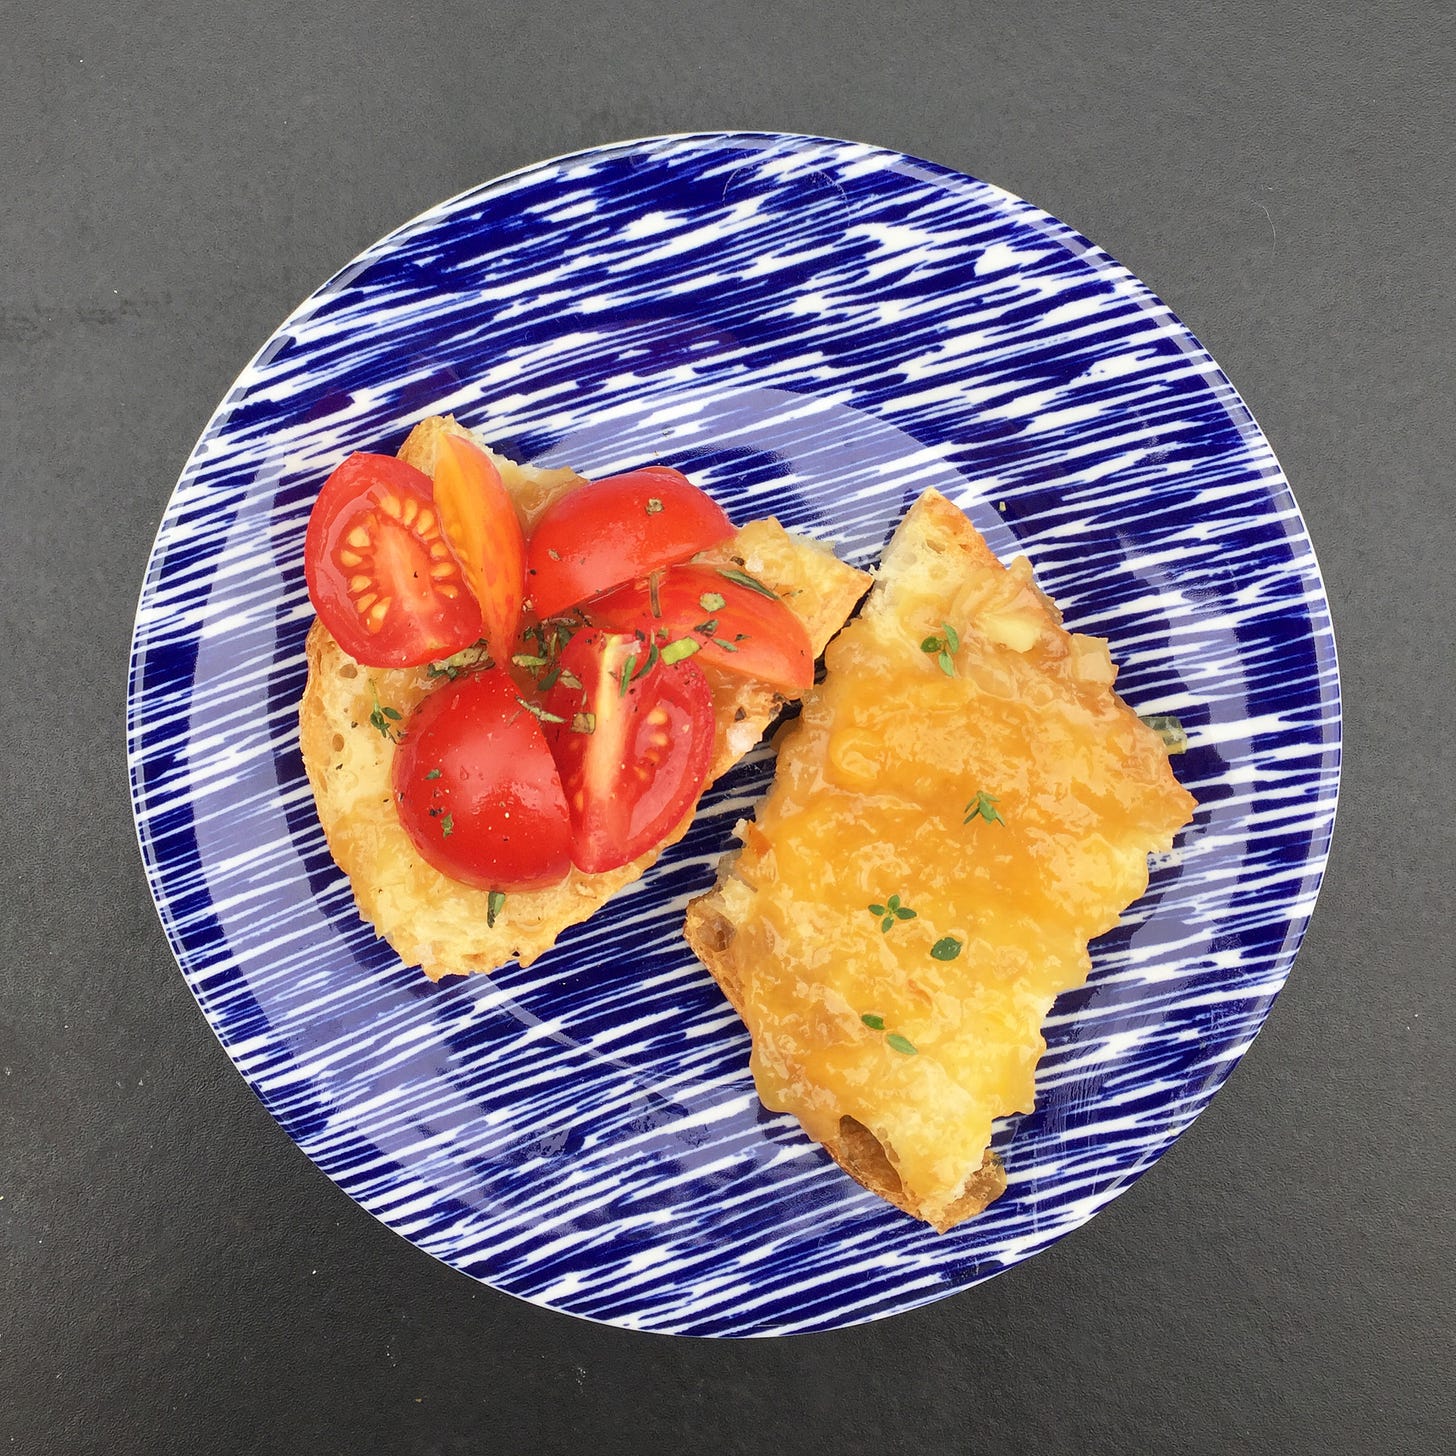 On a small blue plate, two half-slices of bread. On one is peach jam with a few thyme leaves, and on the other are quartered cherry tomatoes and chopped oregano.